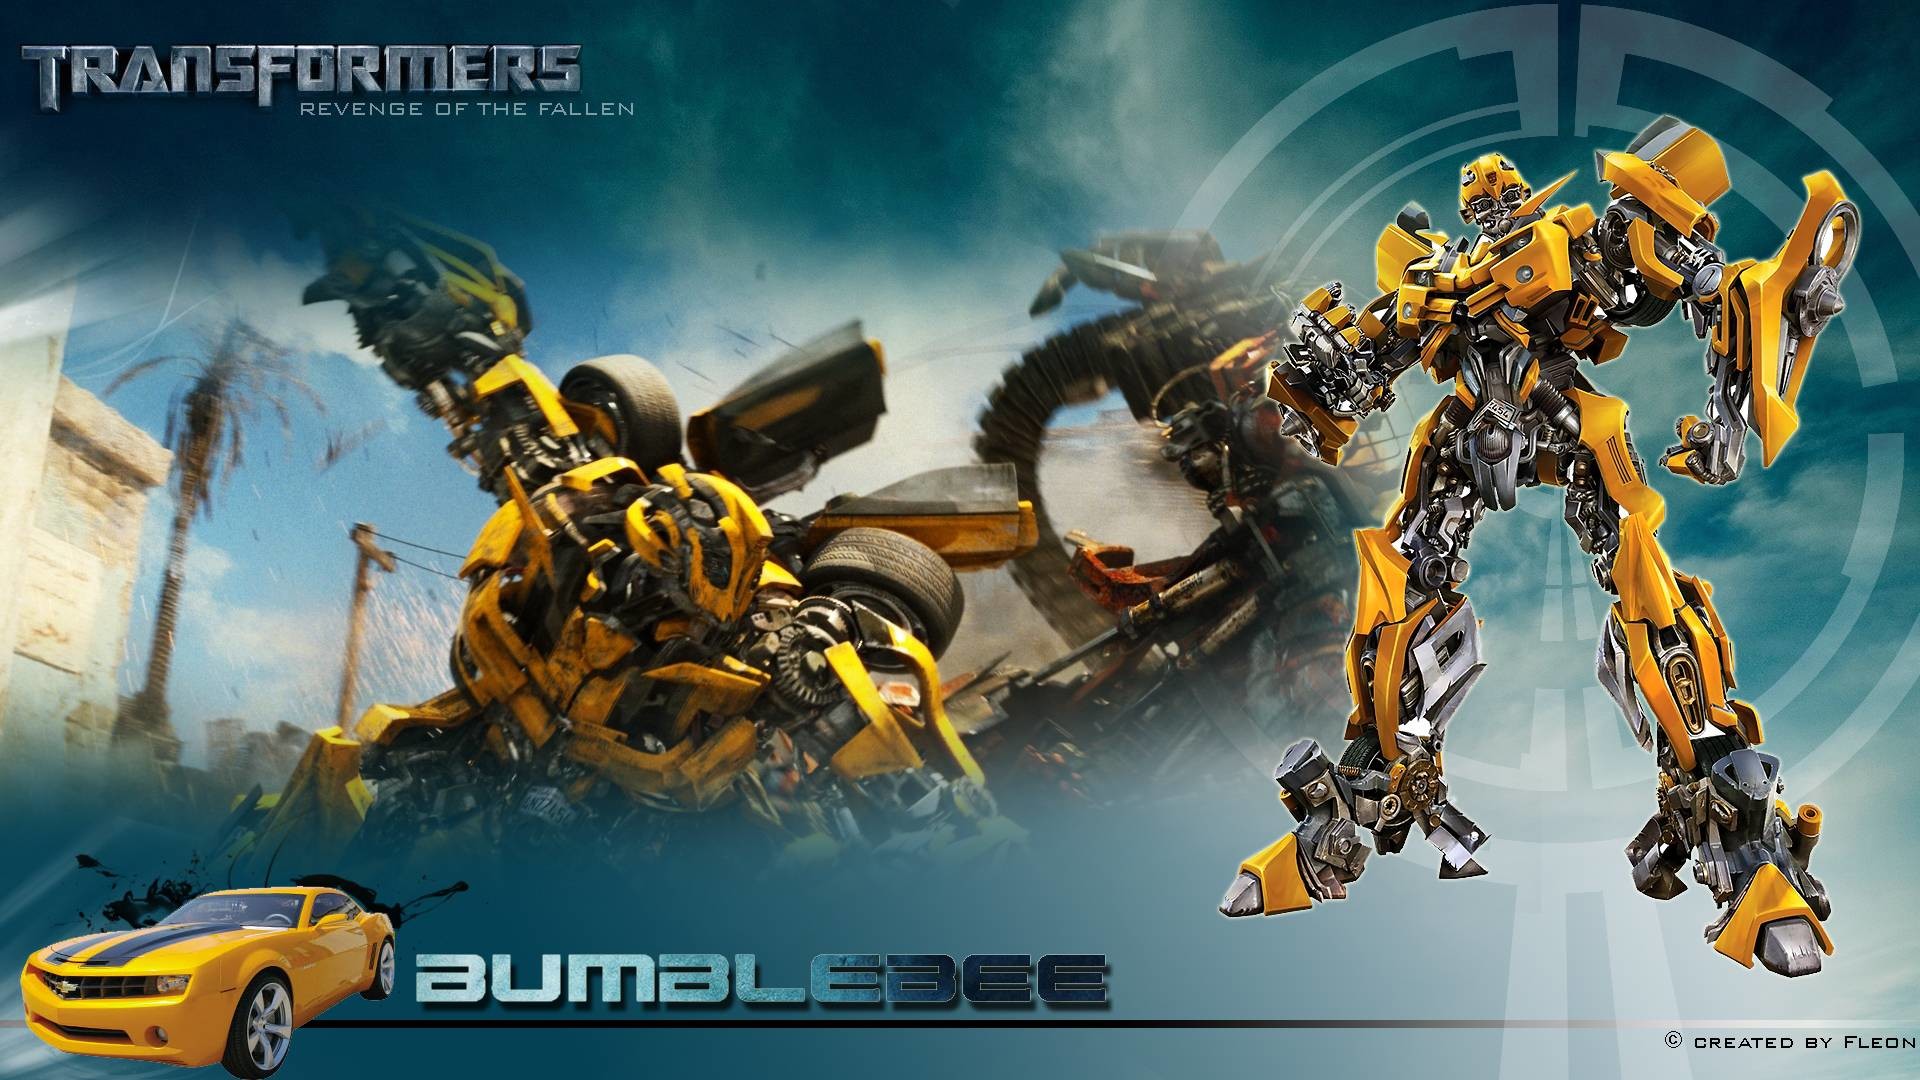 1920x1080 Transformers 2 Bumblebee Wallpaper Transformers 2 Movies (82 Wallpapers)